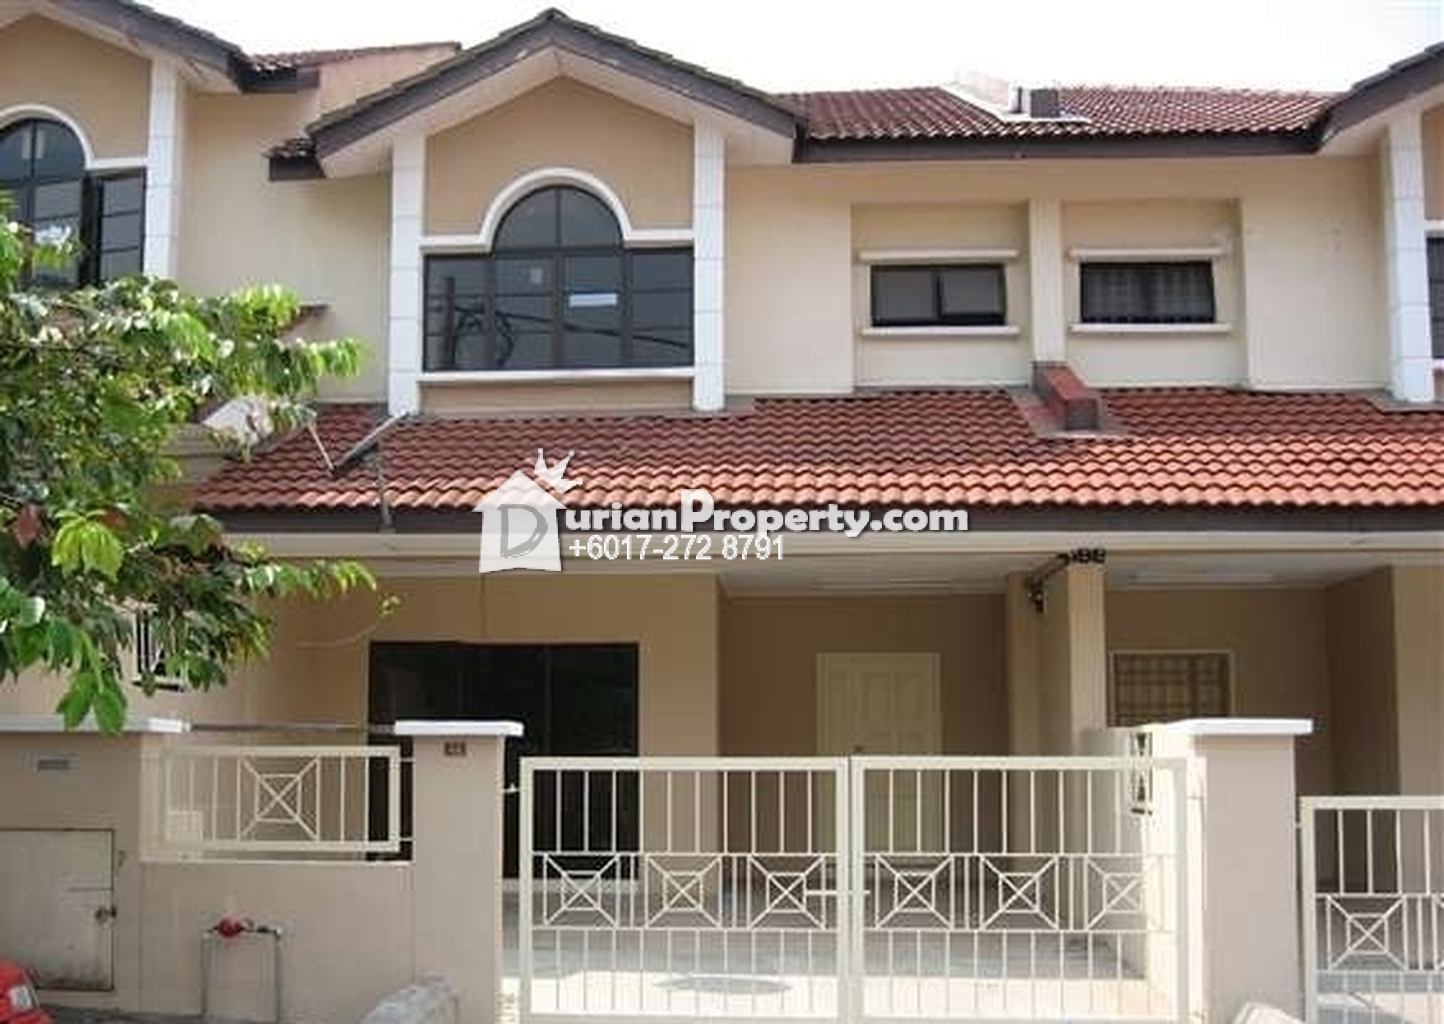 Terrace House For Sale at Taman Prima Impian, Segambut for RM 970,000 by Jeffrey Yap